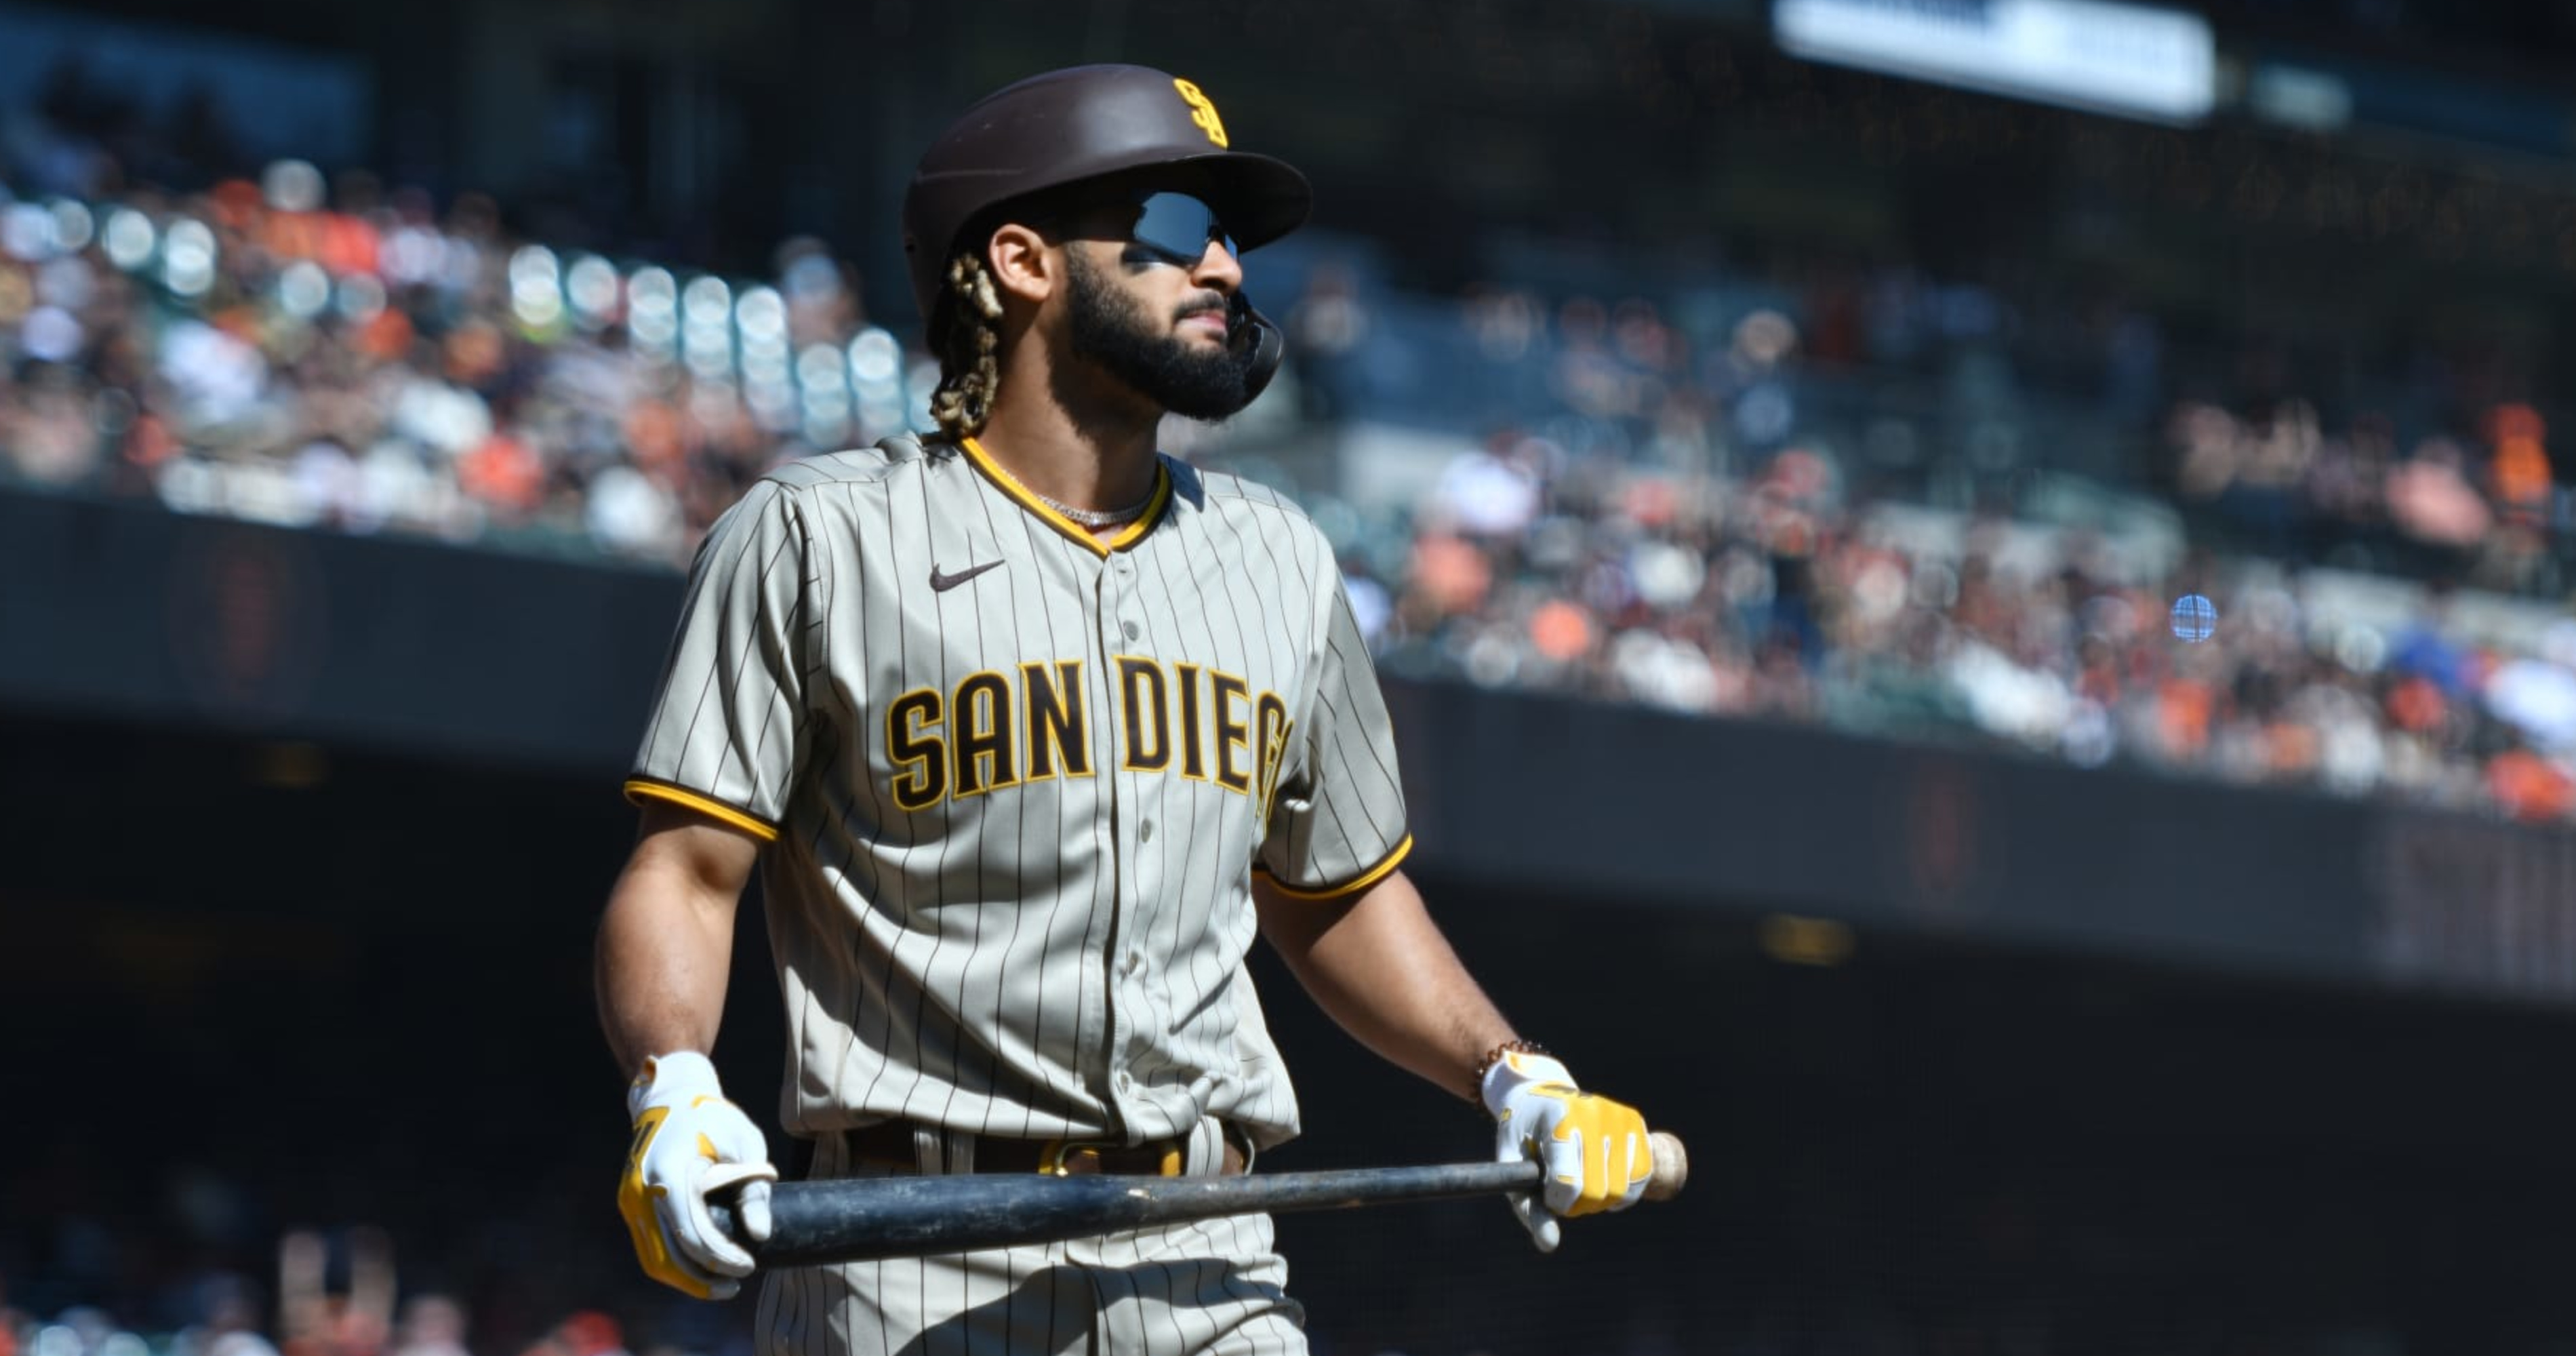 You hope he grows up': Padres' Clevinger critical of Tatis after suspension